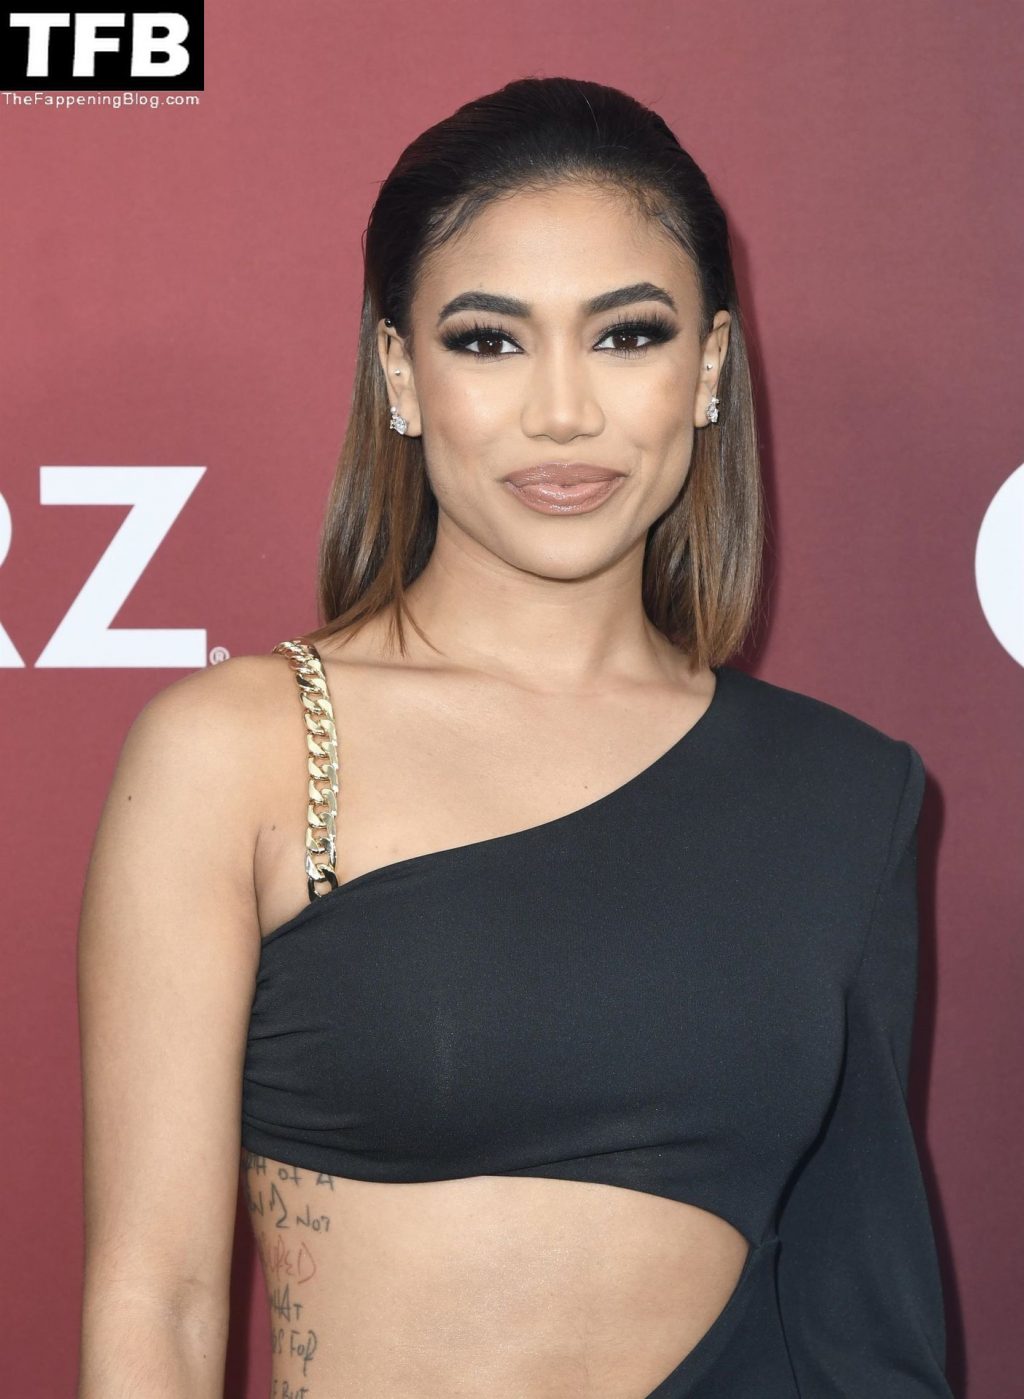 Paige Hurd is Seen at the “Power Book II: Ghost” Premiere in NYC (11 Photos)